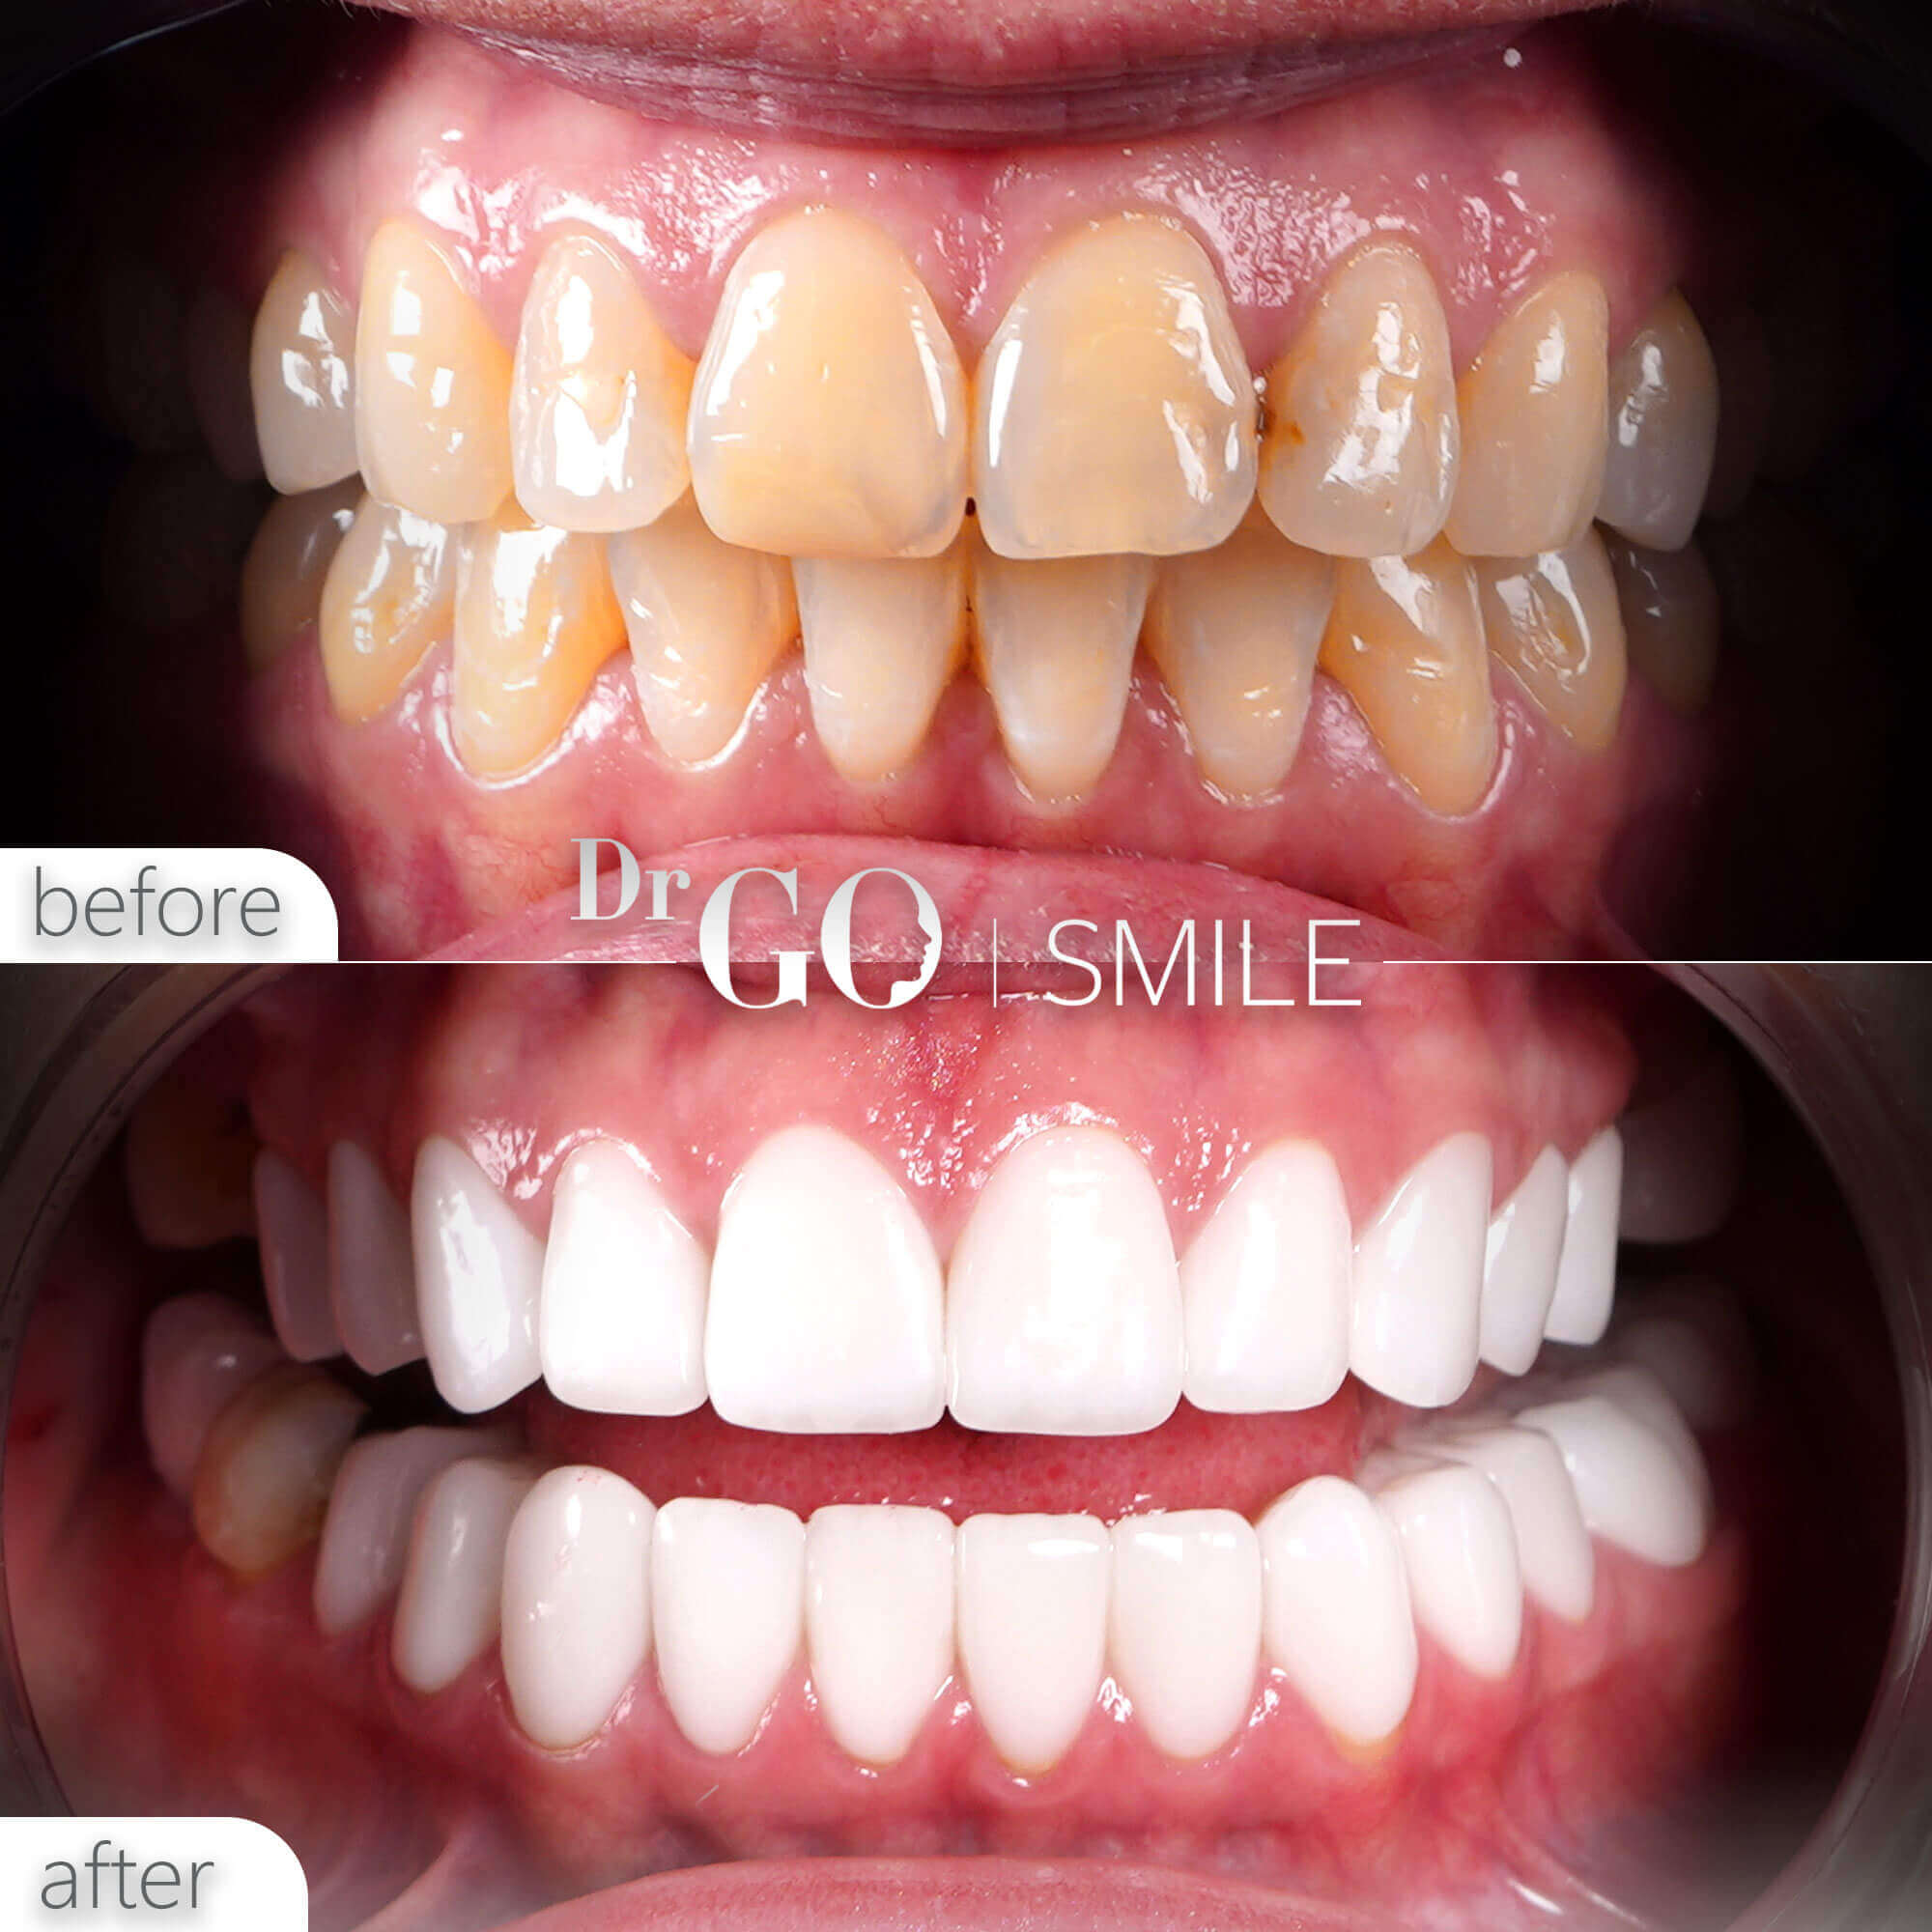 Drgo Smile Before After 18